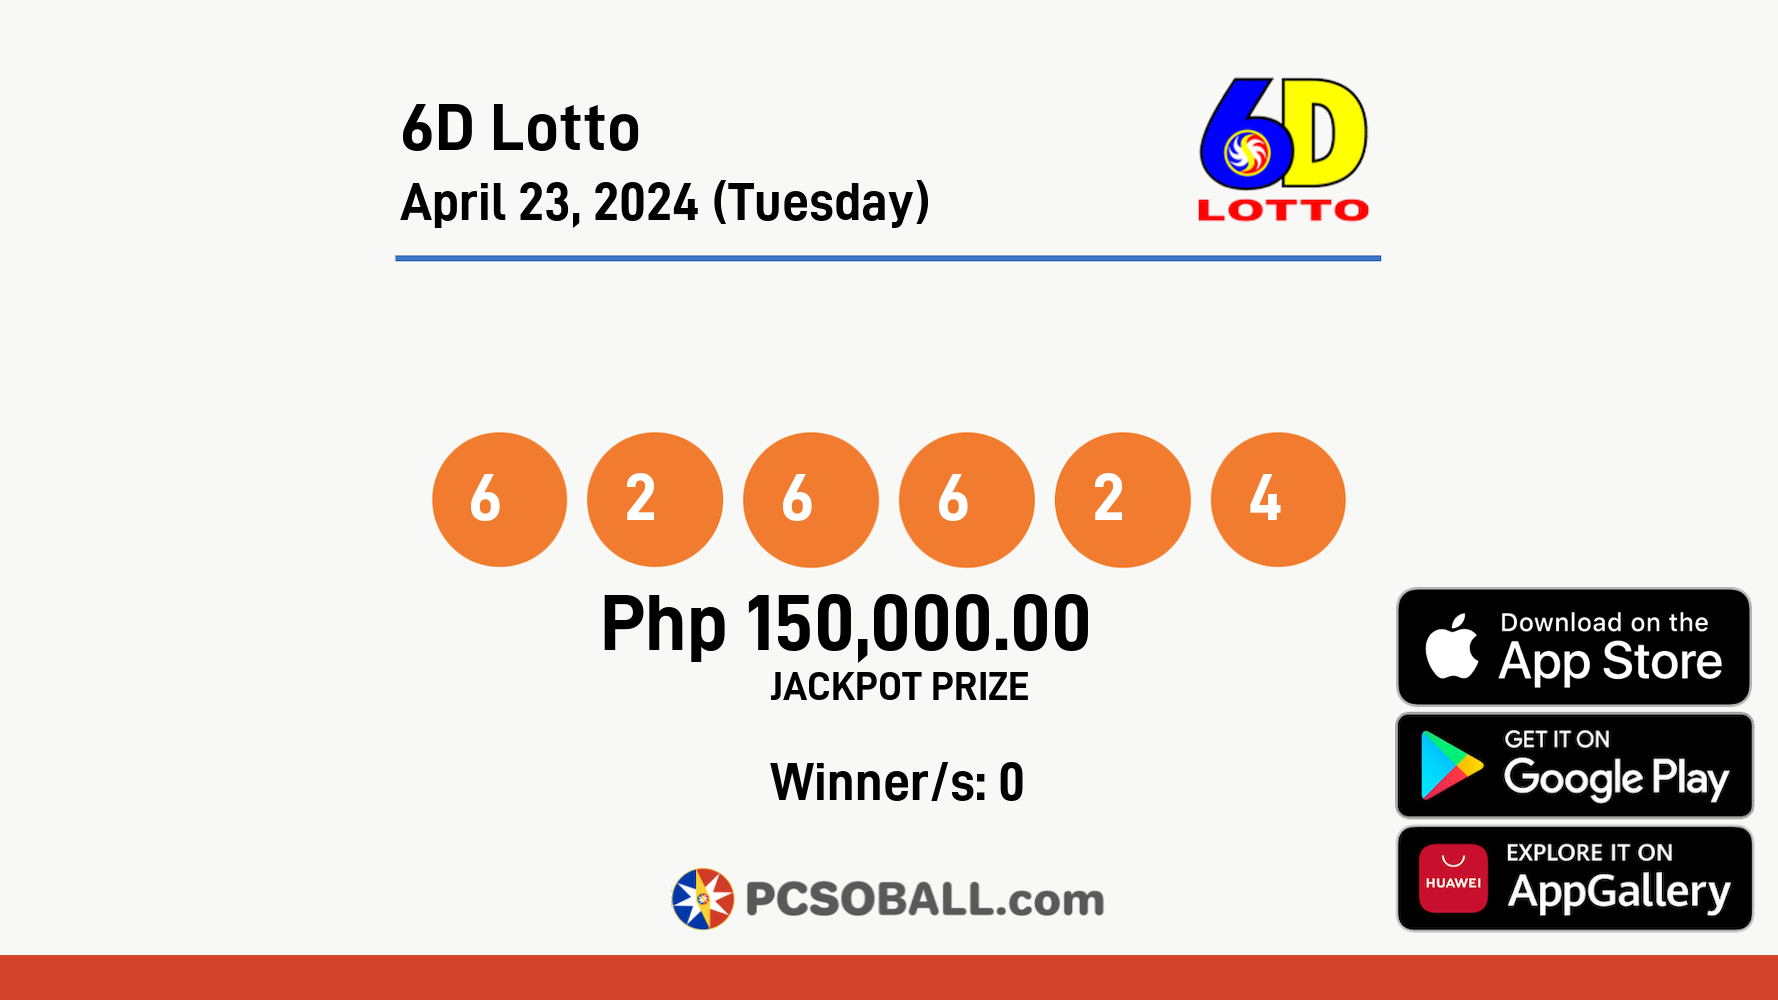 6D Lotto April 23, 2024 (Tuesday) Result